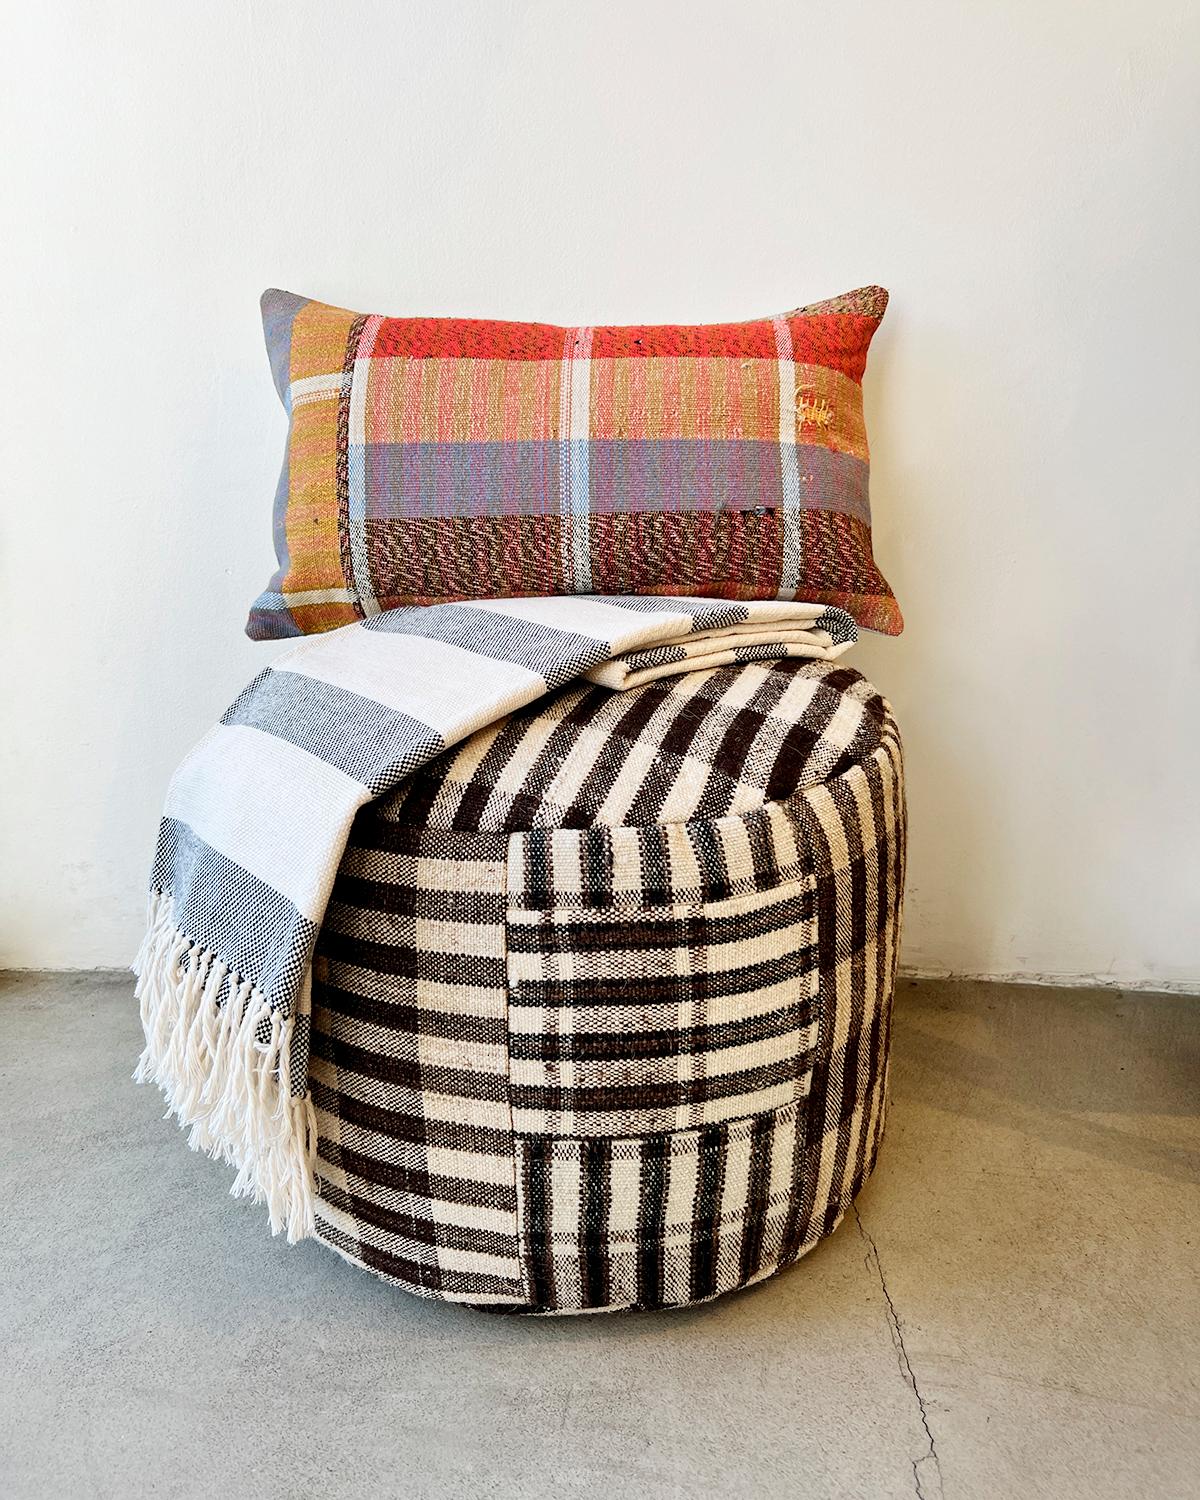 A handsome ottoman to put your feet up

A hundred years ago these fabrics used to be cereal sacks in Northern Portugal. Now they get rediscovered and transformed into a rare collectible. This wool Isabel Checkered Round Pouf Ottoman is a unique and